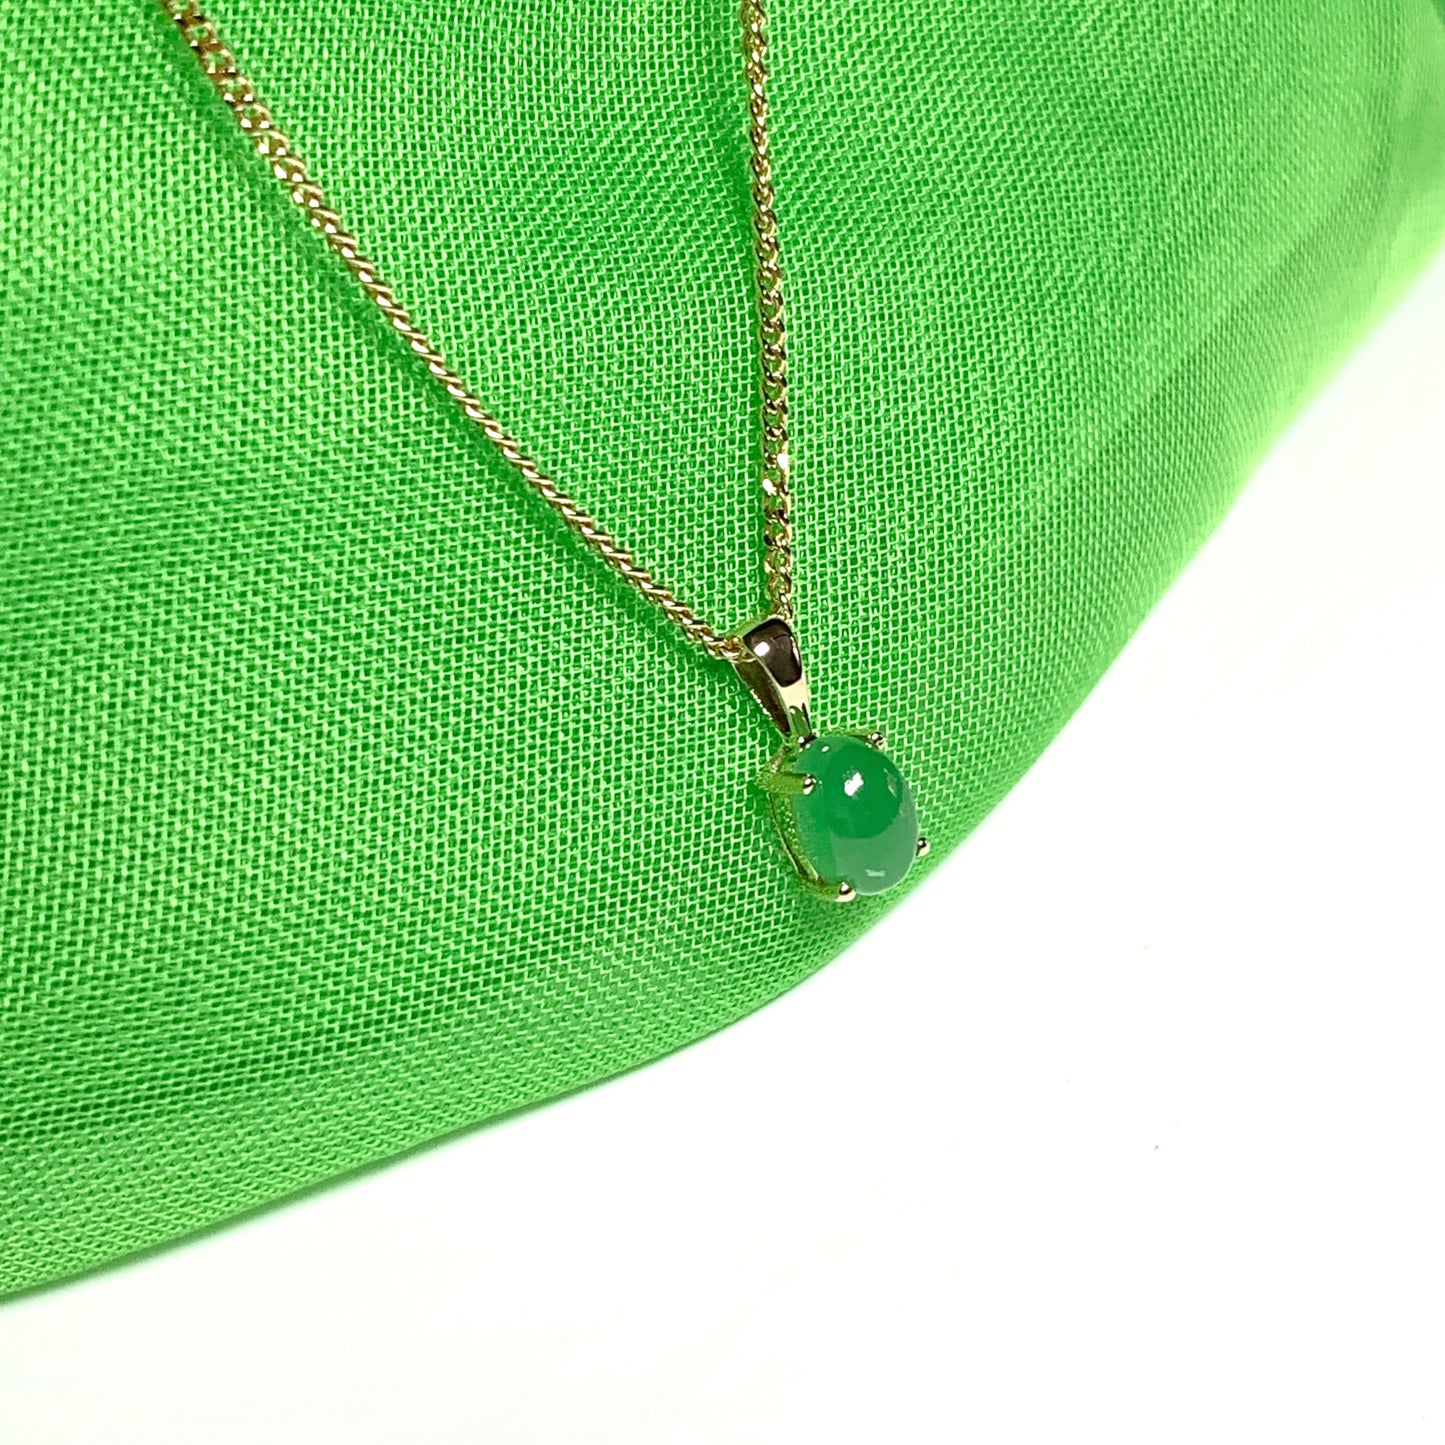 Oval shaped real green jade necklace yellow gold including chain